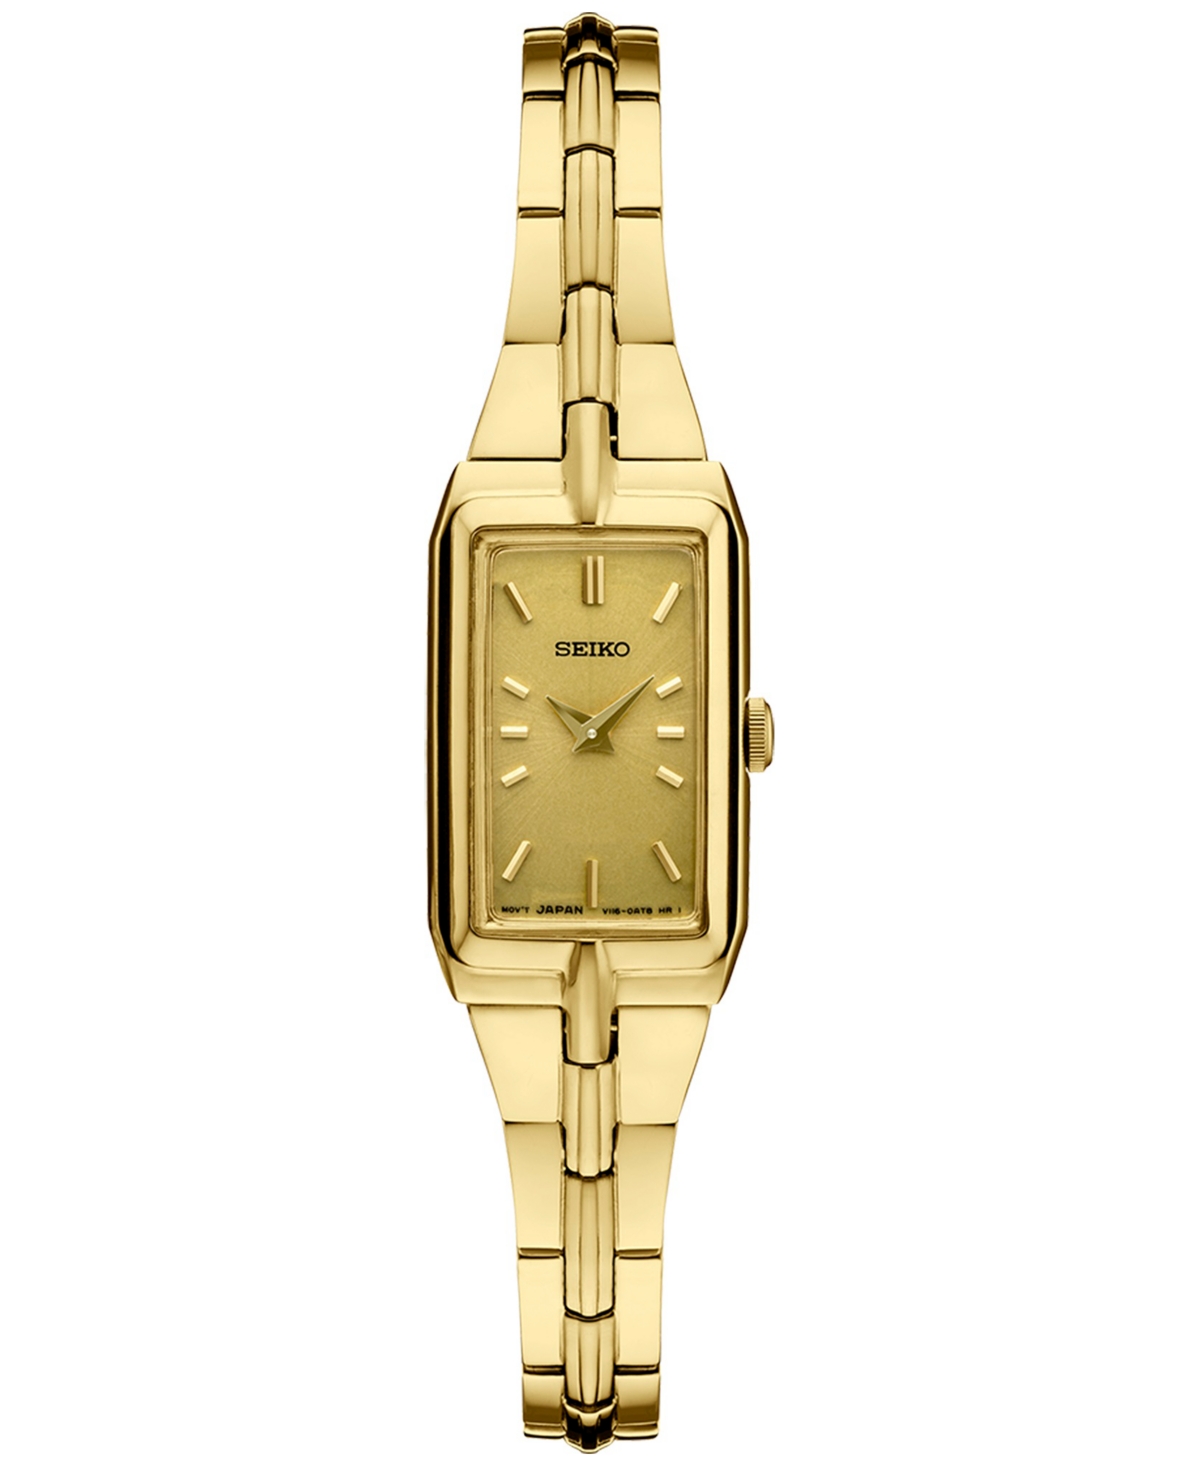 Seiko Women's Essential Gold-Tone Stainless Steel Bracelet Watch 15mm &  Reviews - All Watches - Jewelry & Watches - Macy's